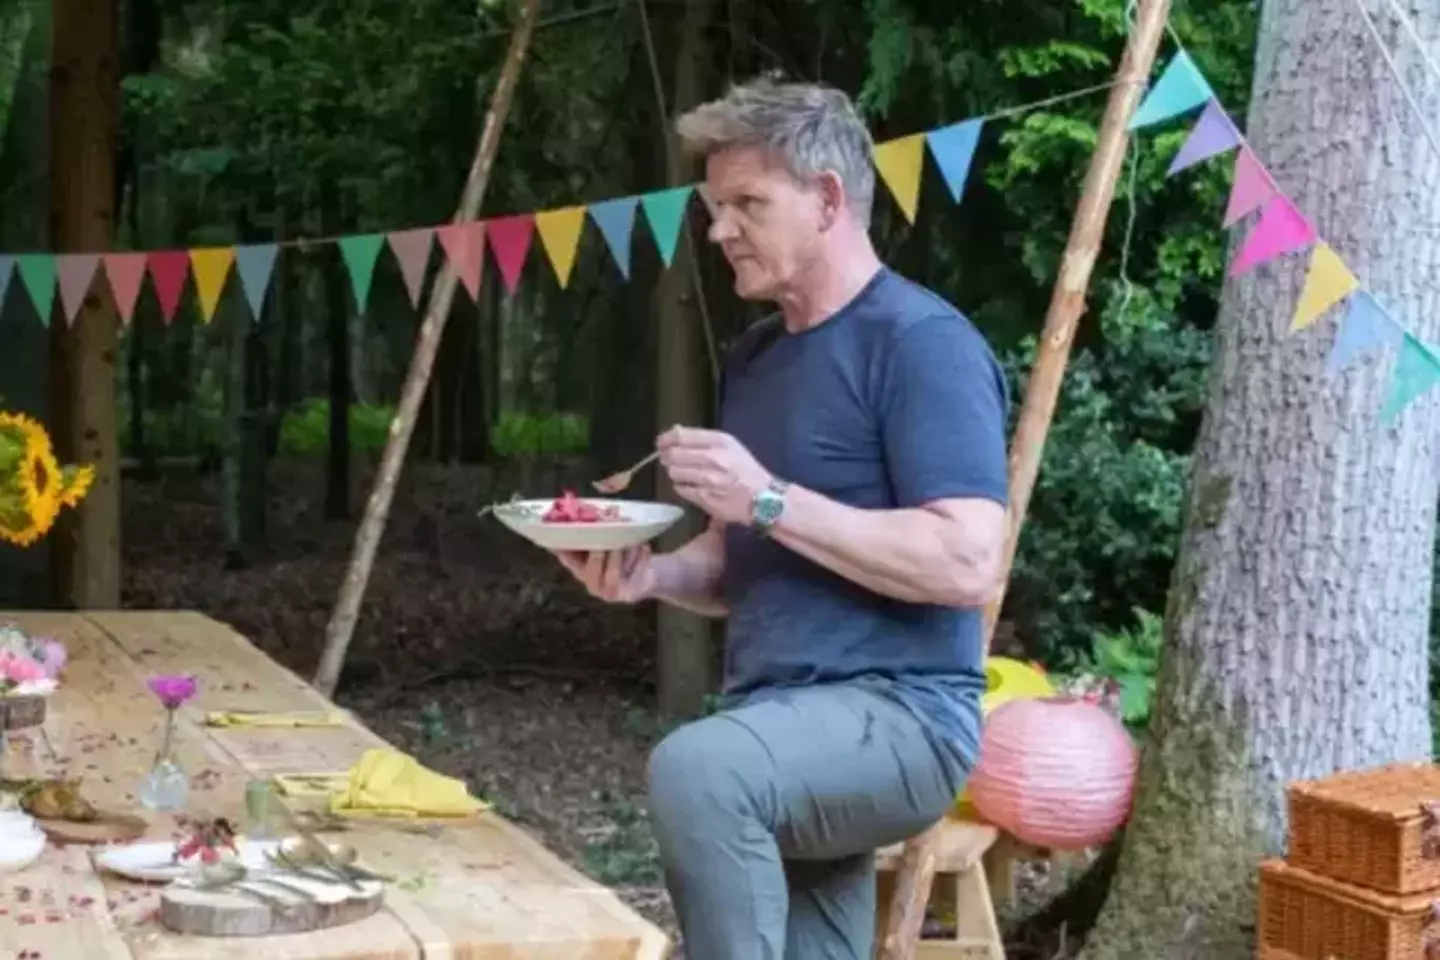 Gordon Ramsay has got some advice for you if you're heading out for a bite to eat.